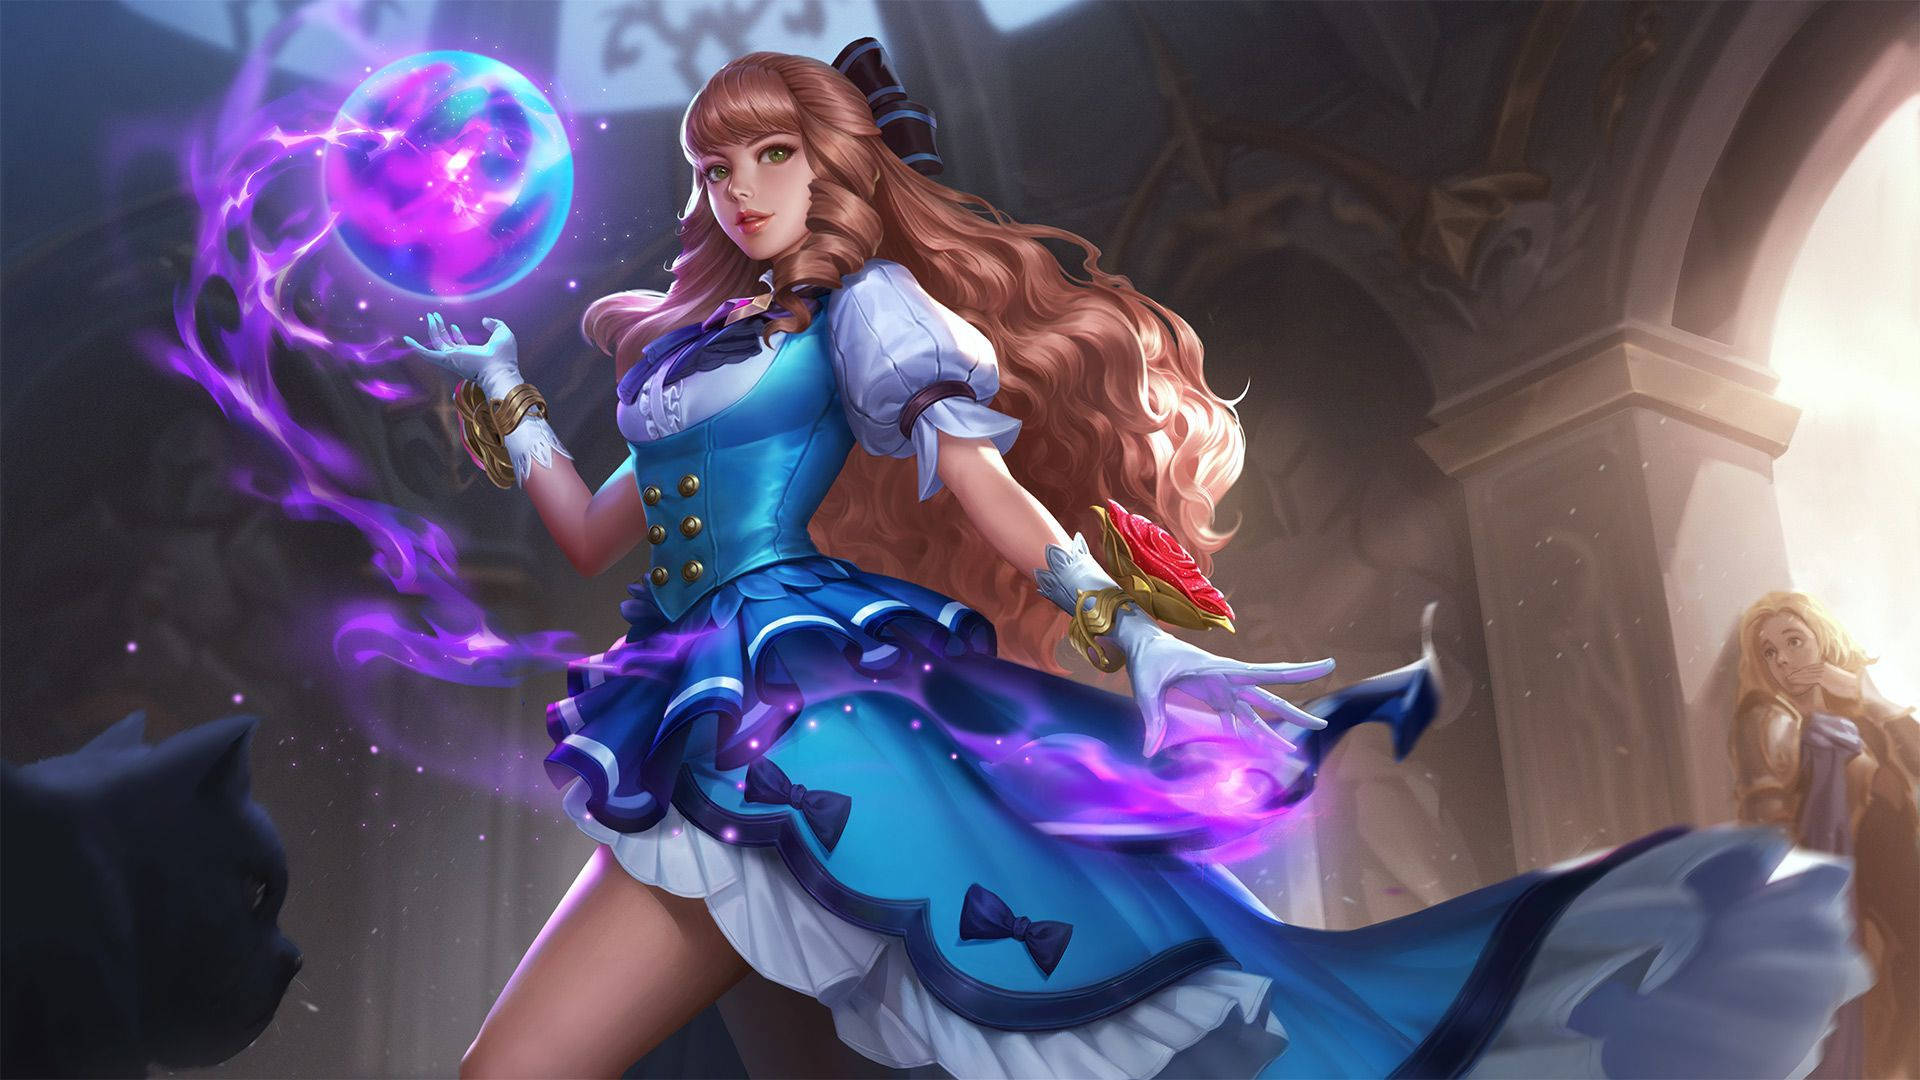 Free Mobile Legend Wallpaper Downloads, [200+] Mobile Legend Wallpapers for  FREE 